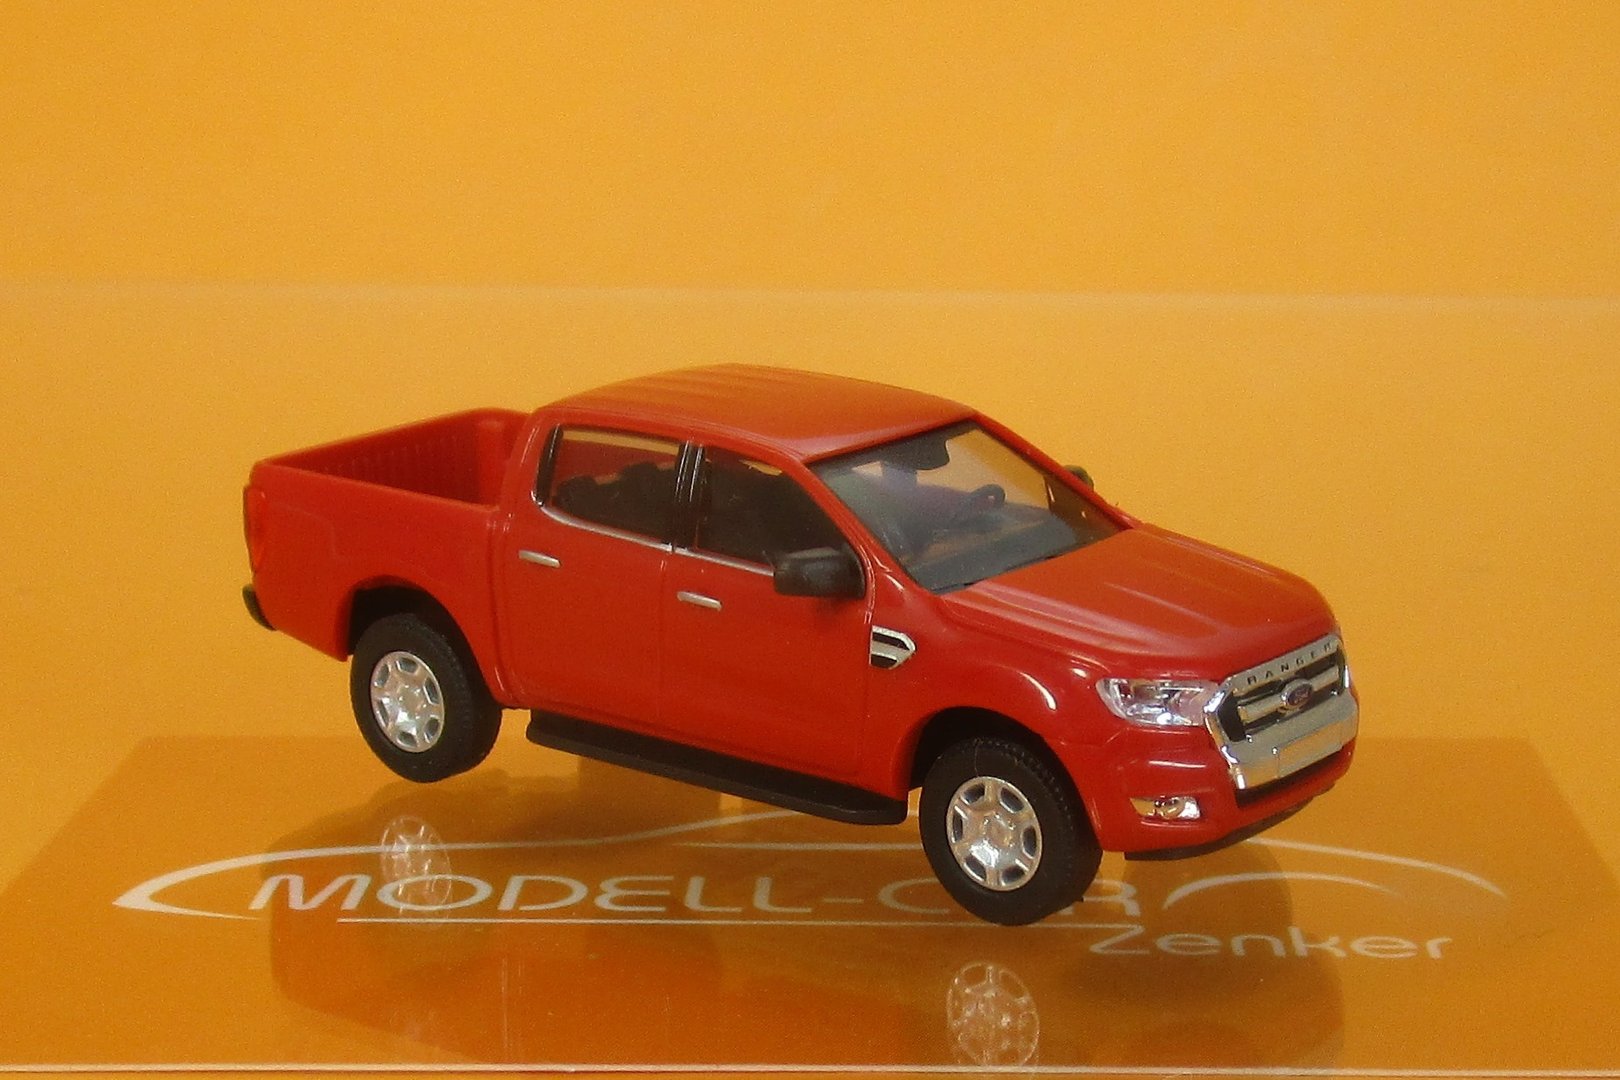 Red HO 1:87 Busch # 52801-2016 Ford Ranger Crew Cab Pickup Truck